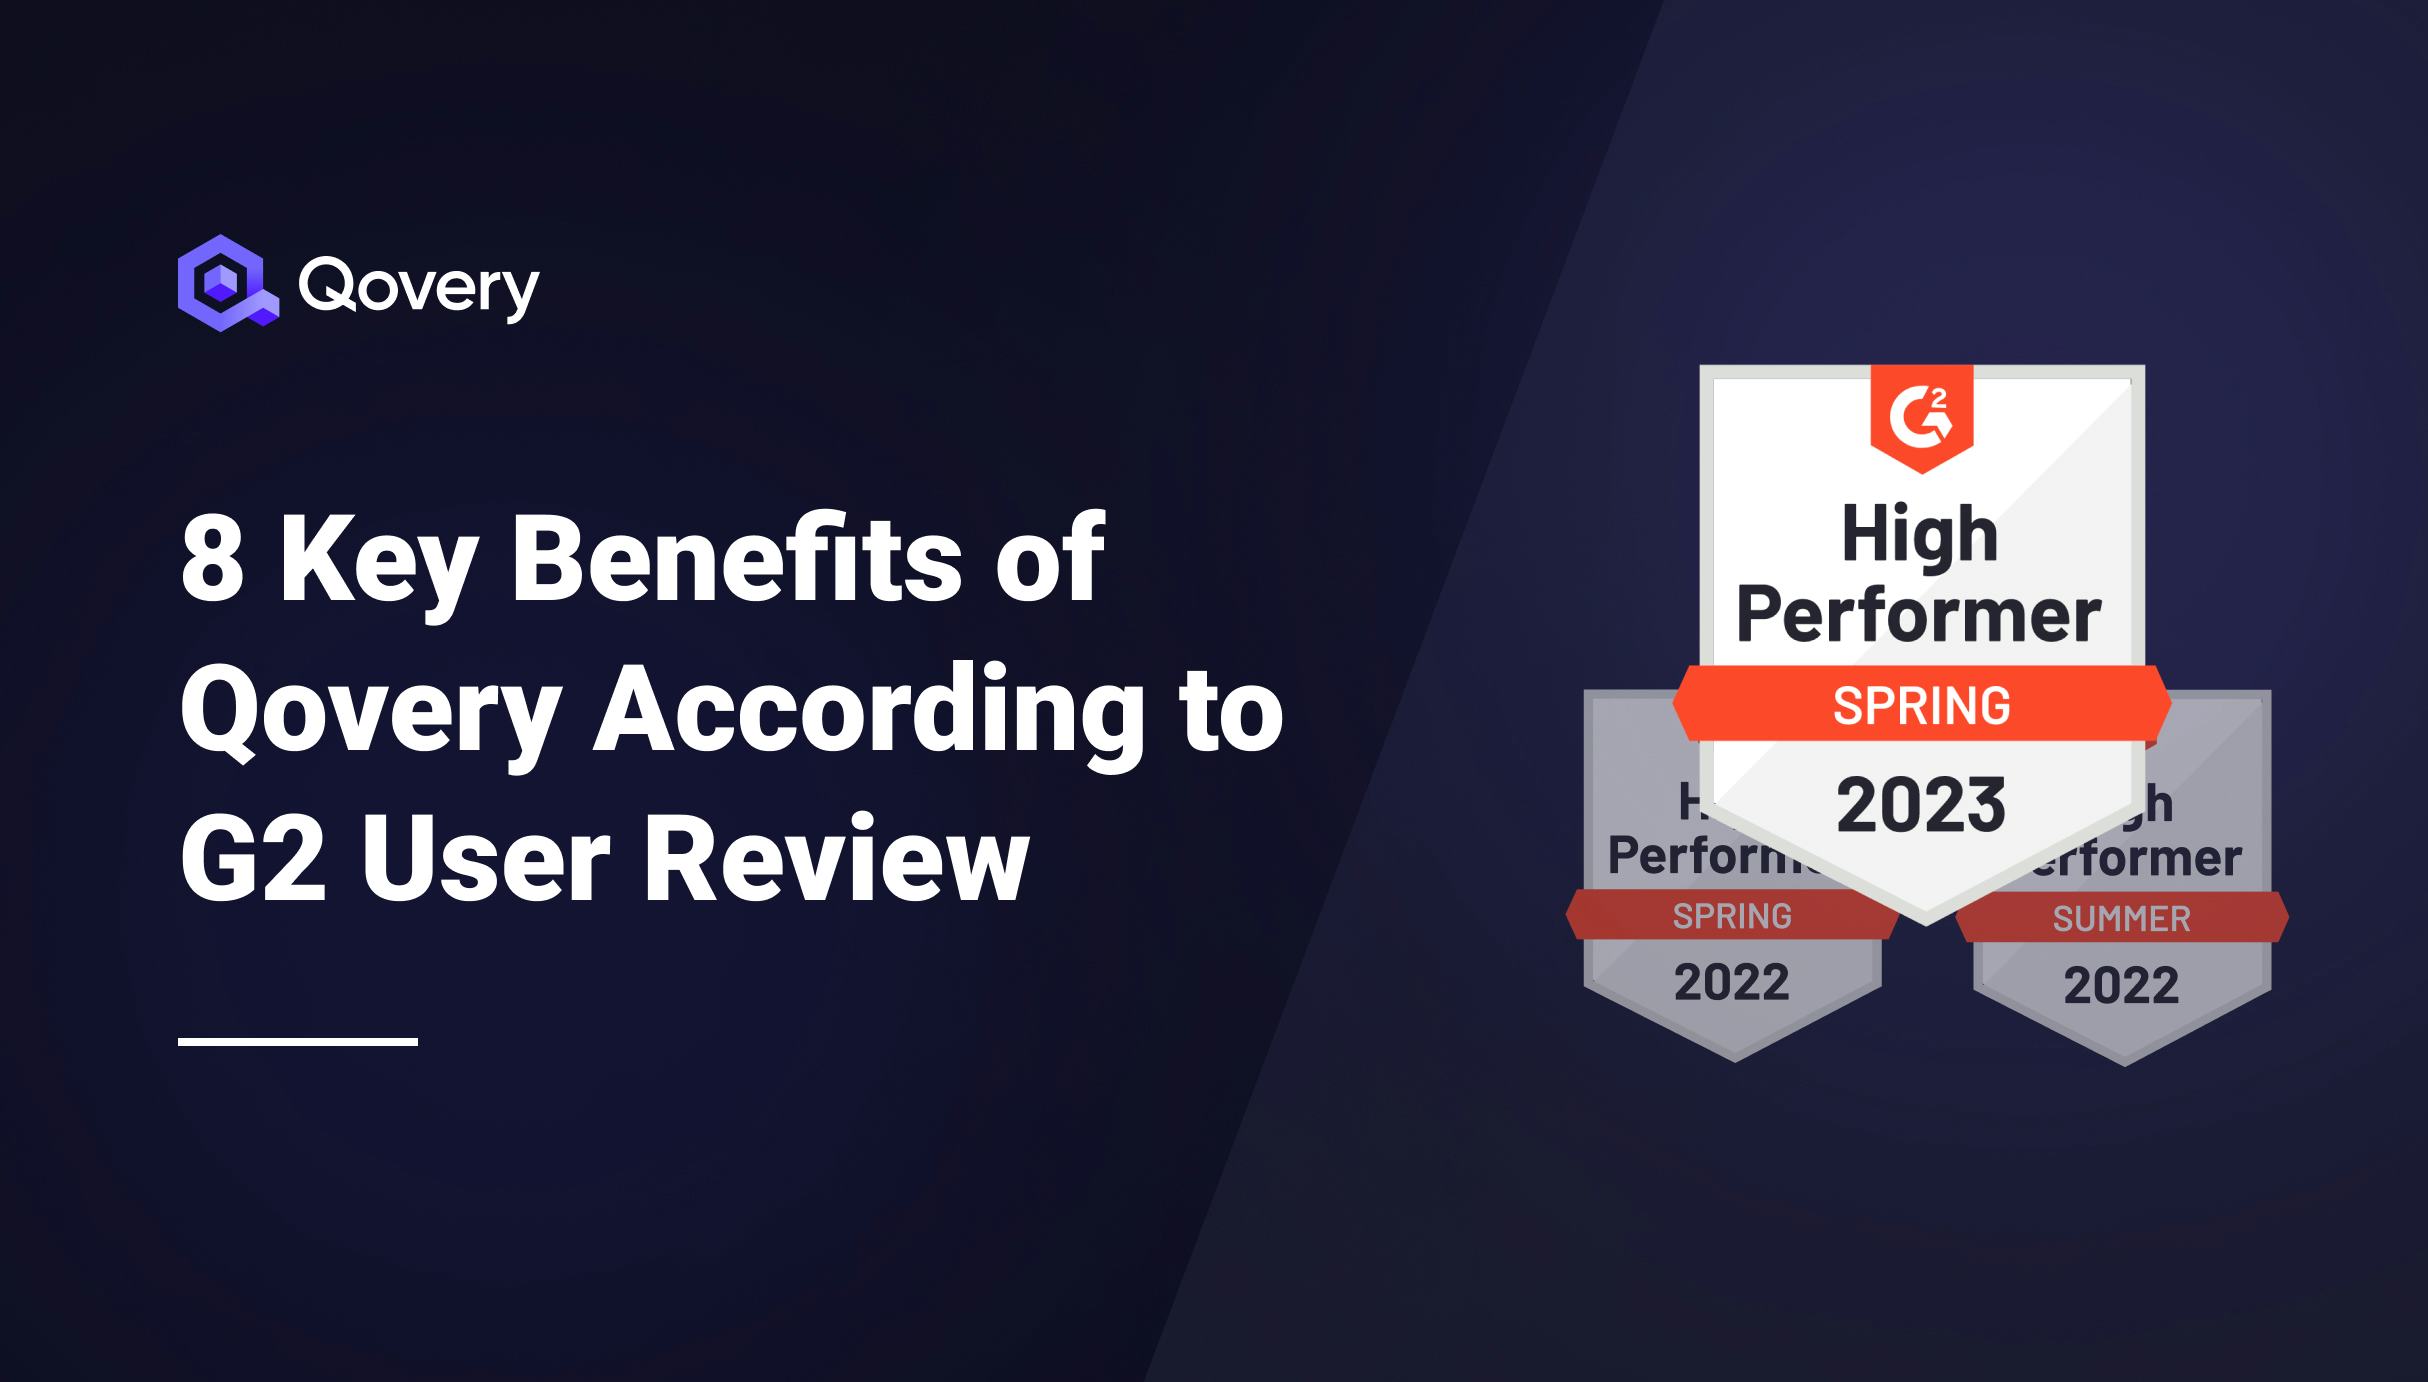 8 Key Benefits of Qovery According to G2 User Review